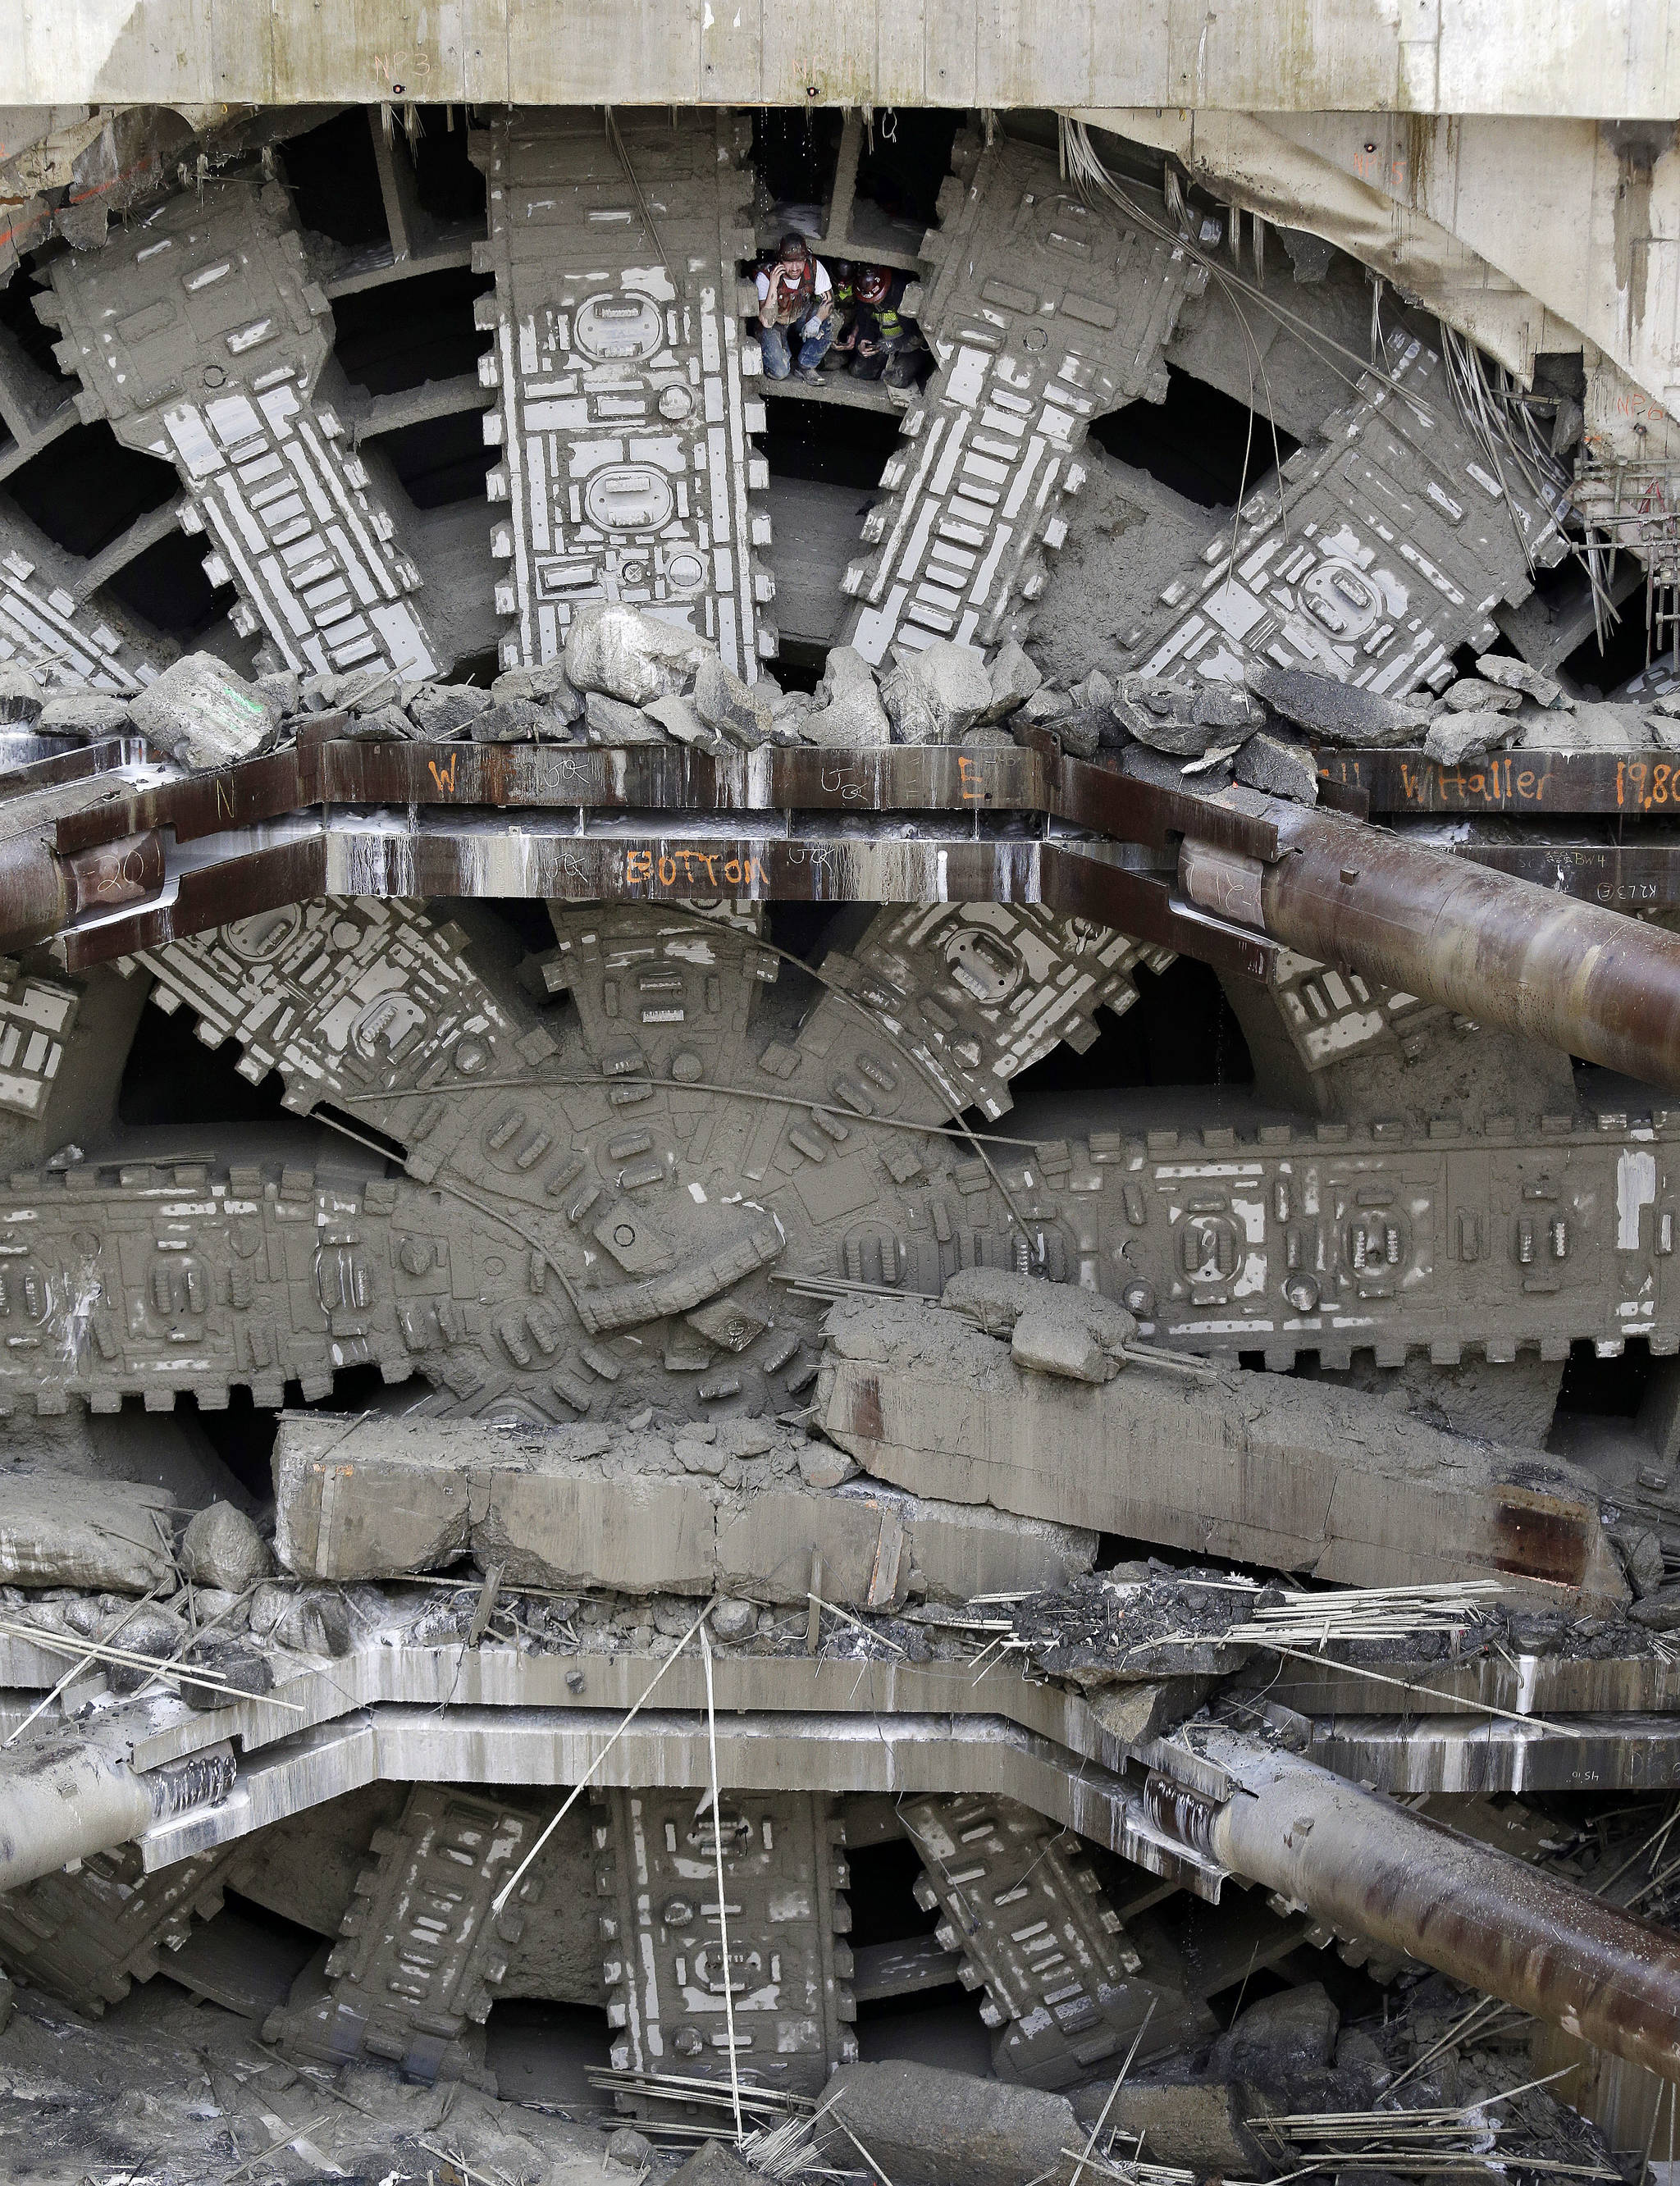 A pair of workers climbs out between cutting blades near the top of a massive tunneling machine Tuesday under Seattle. (Elaine Thompson/The Associated Press)